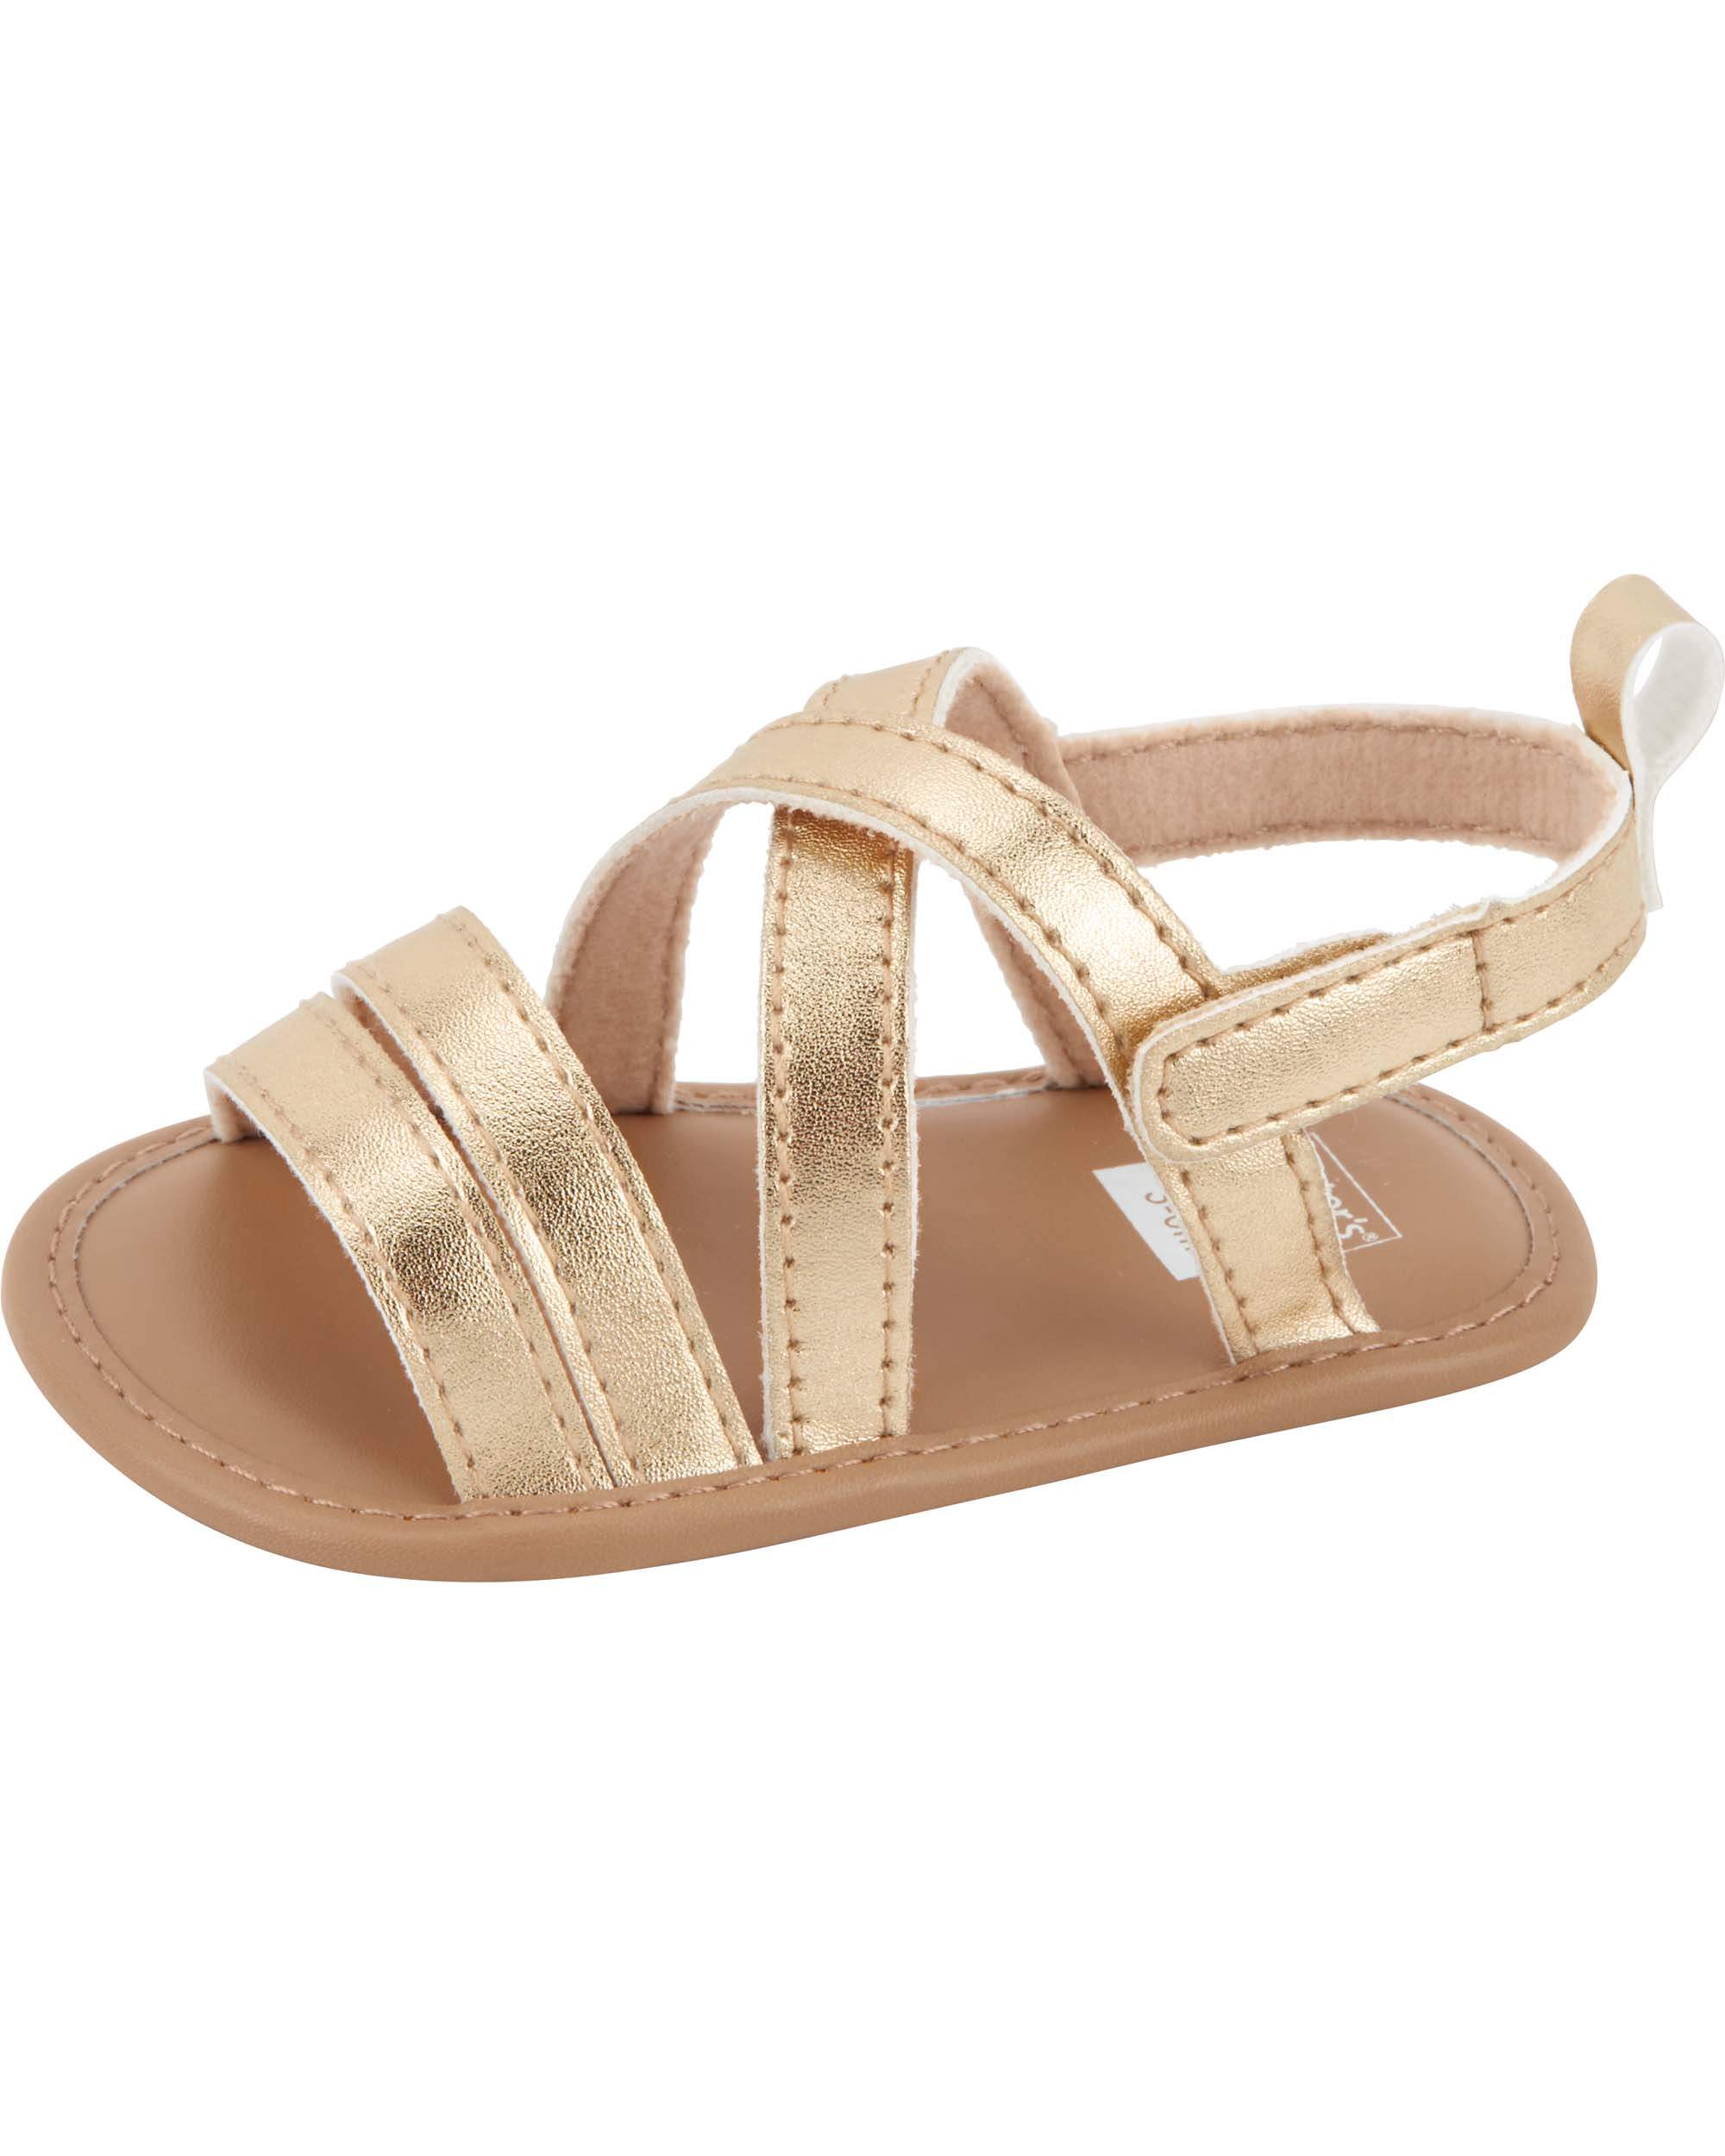 Strappy Sandal Baby Shoes